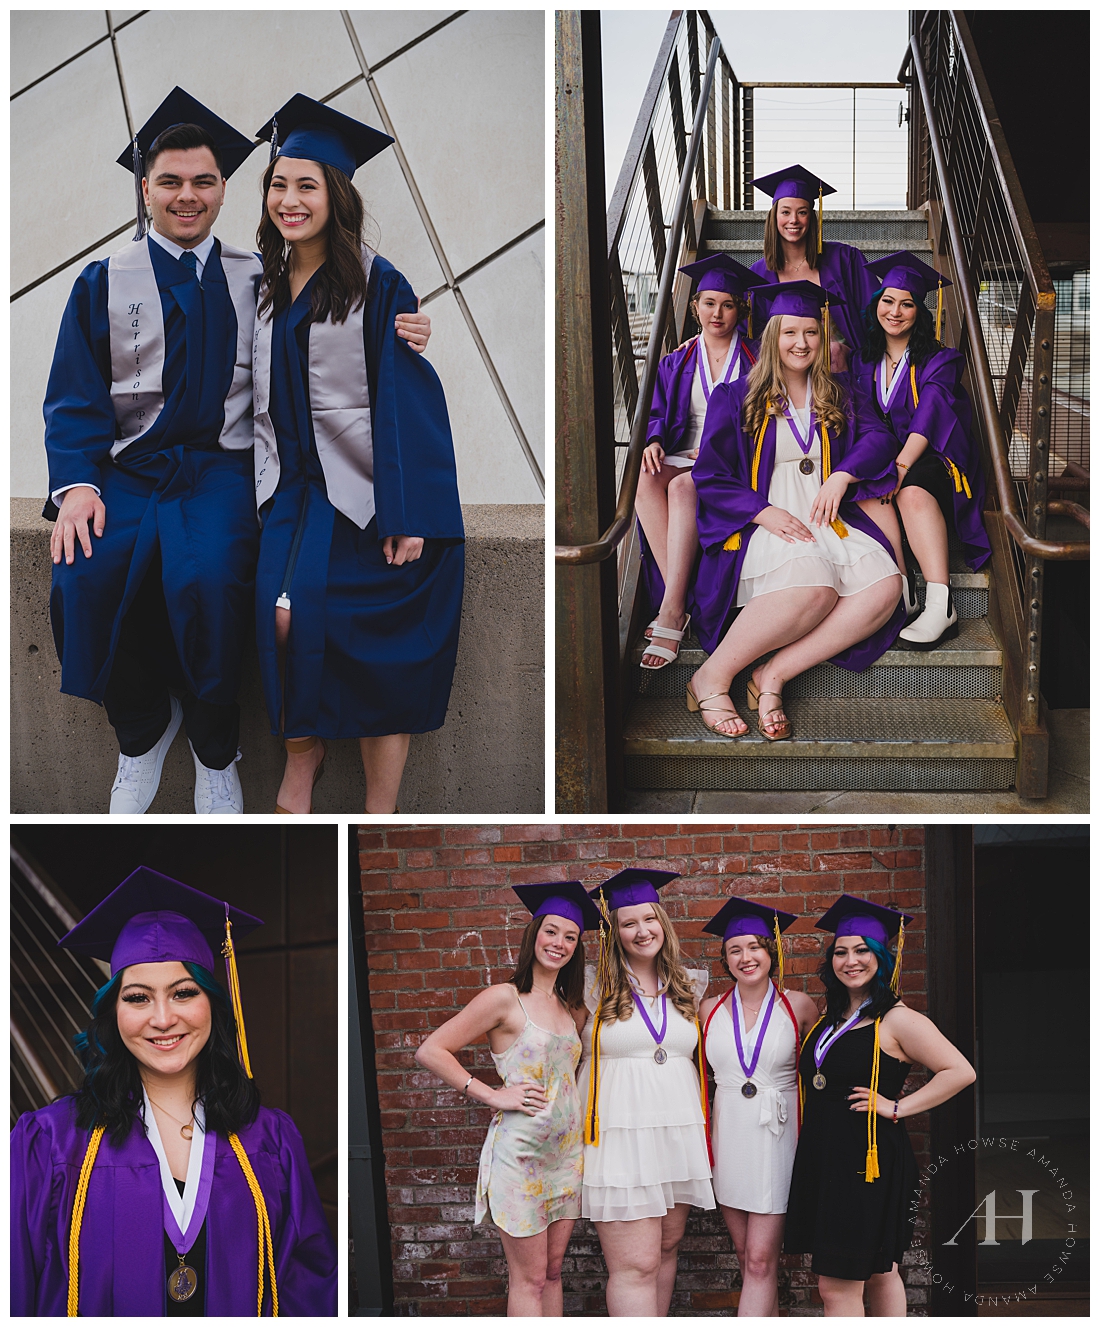 Tacoma Museum of Glass Group Senior Portraits | Modern Cap and Gown Portraits in Tacoma, How to Celebrate Graduation, Cute BFF Graduation Portraits | Photographed by the Best Tacoma Senior Photographer Amanda Howse